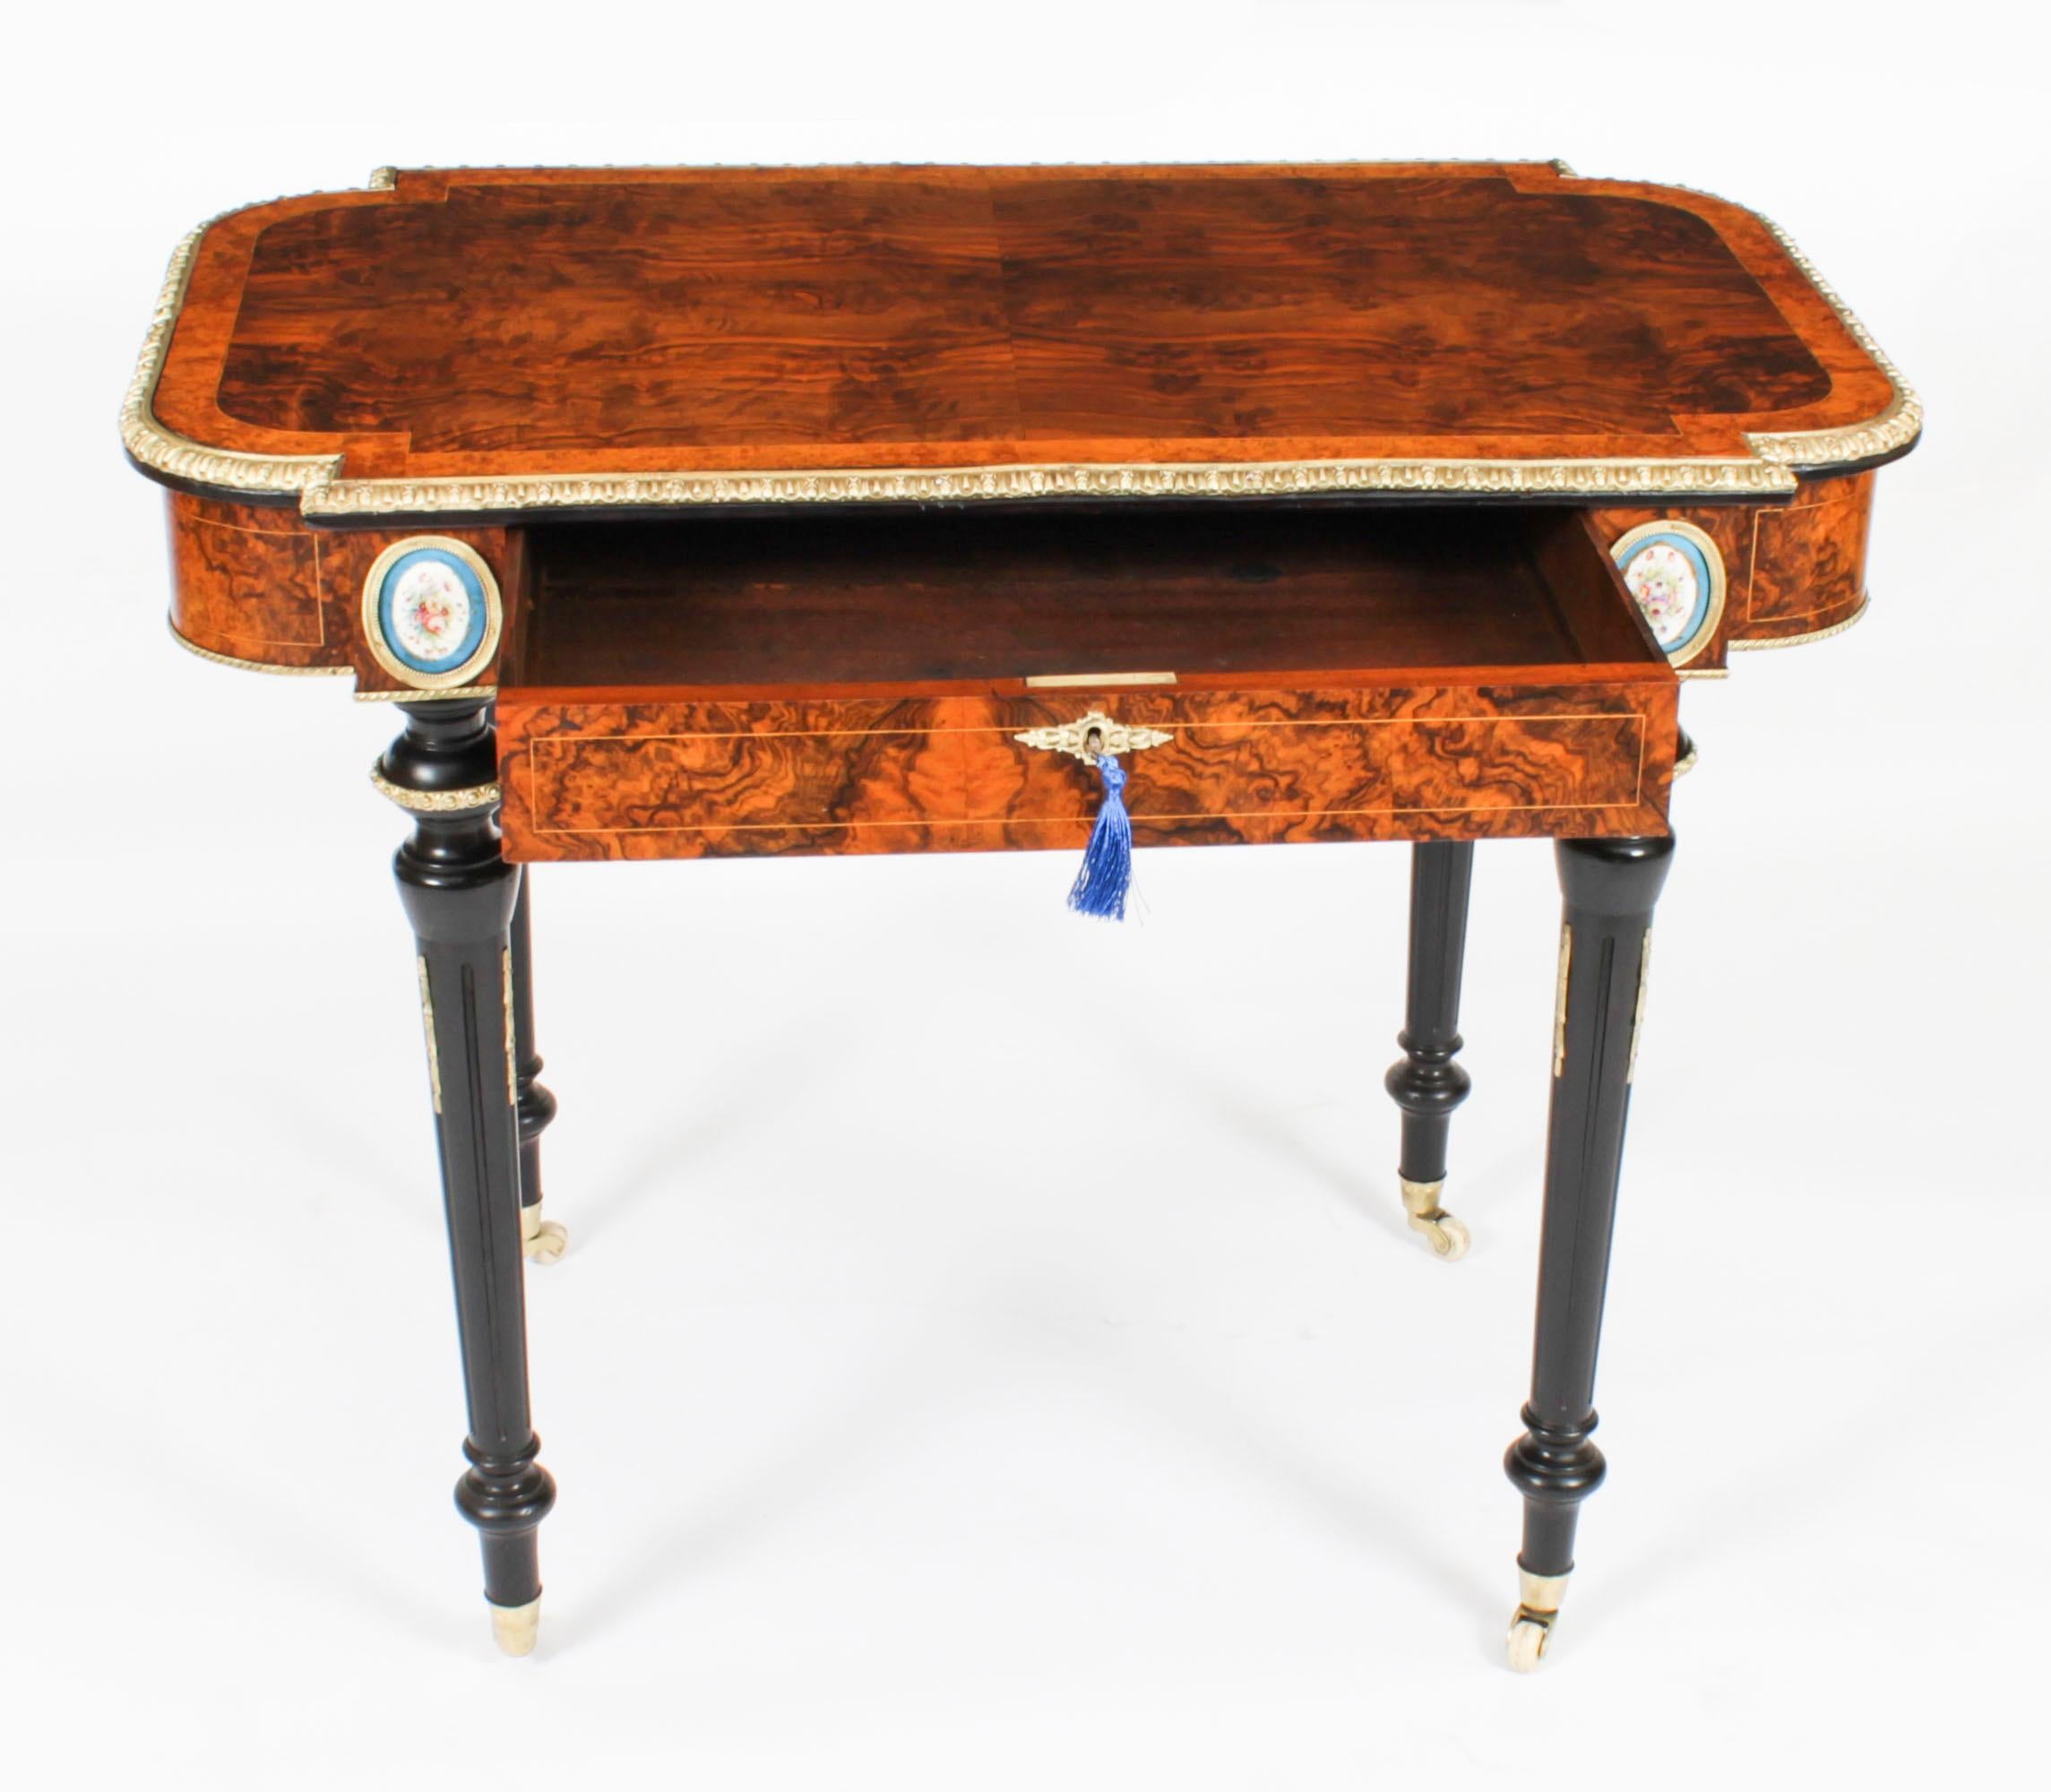 Antique French Burr Walnut Sevres & Ormolu Mounted Writing Table Desk 19th C For Sale 15